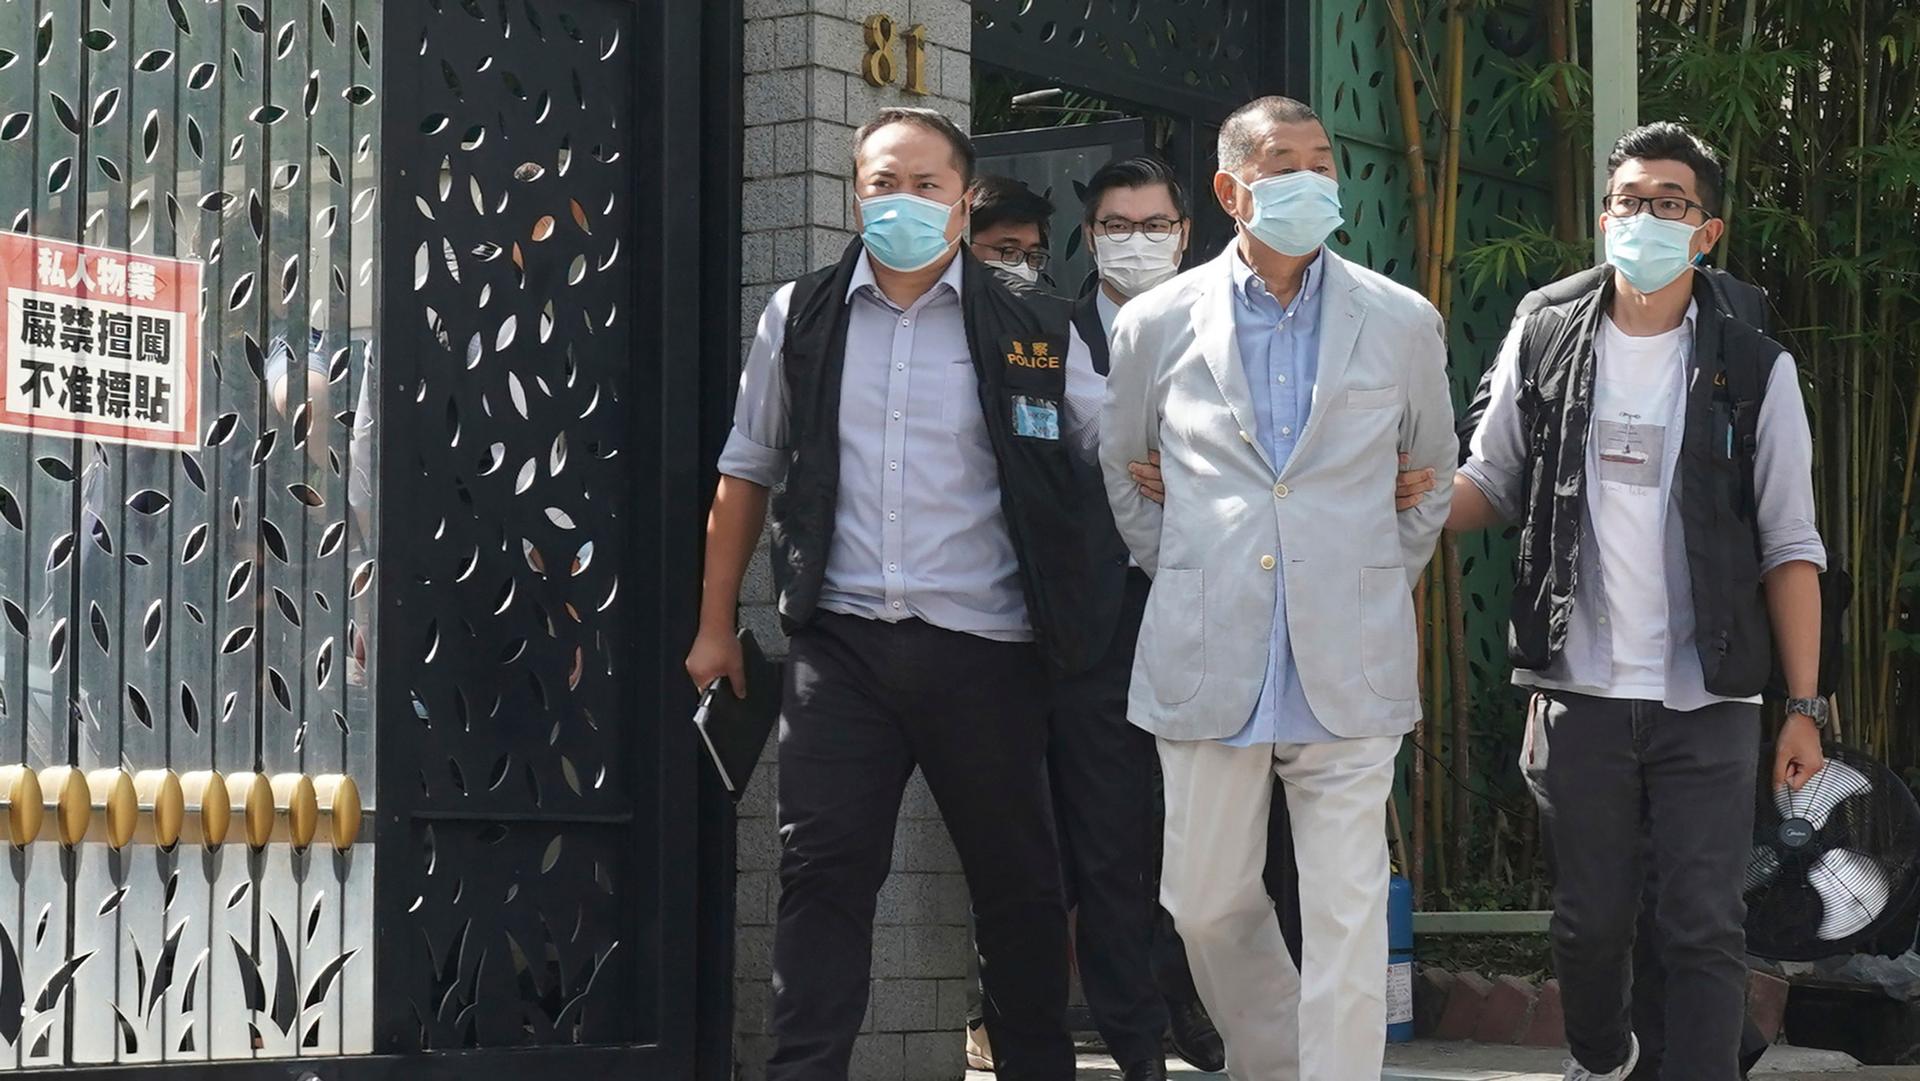 Hong Kong media tycoon Jimmy Lai, is shown wearing a light colored blazer with his hands handcuffed behind his back.